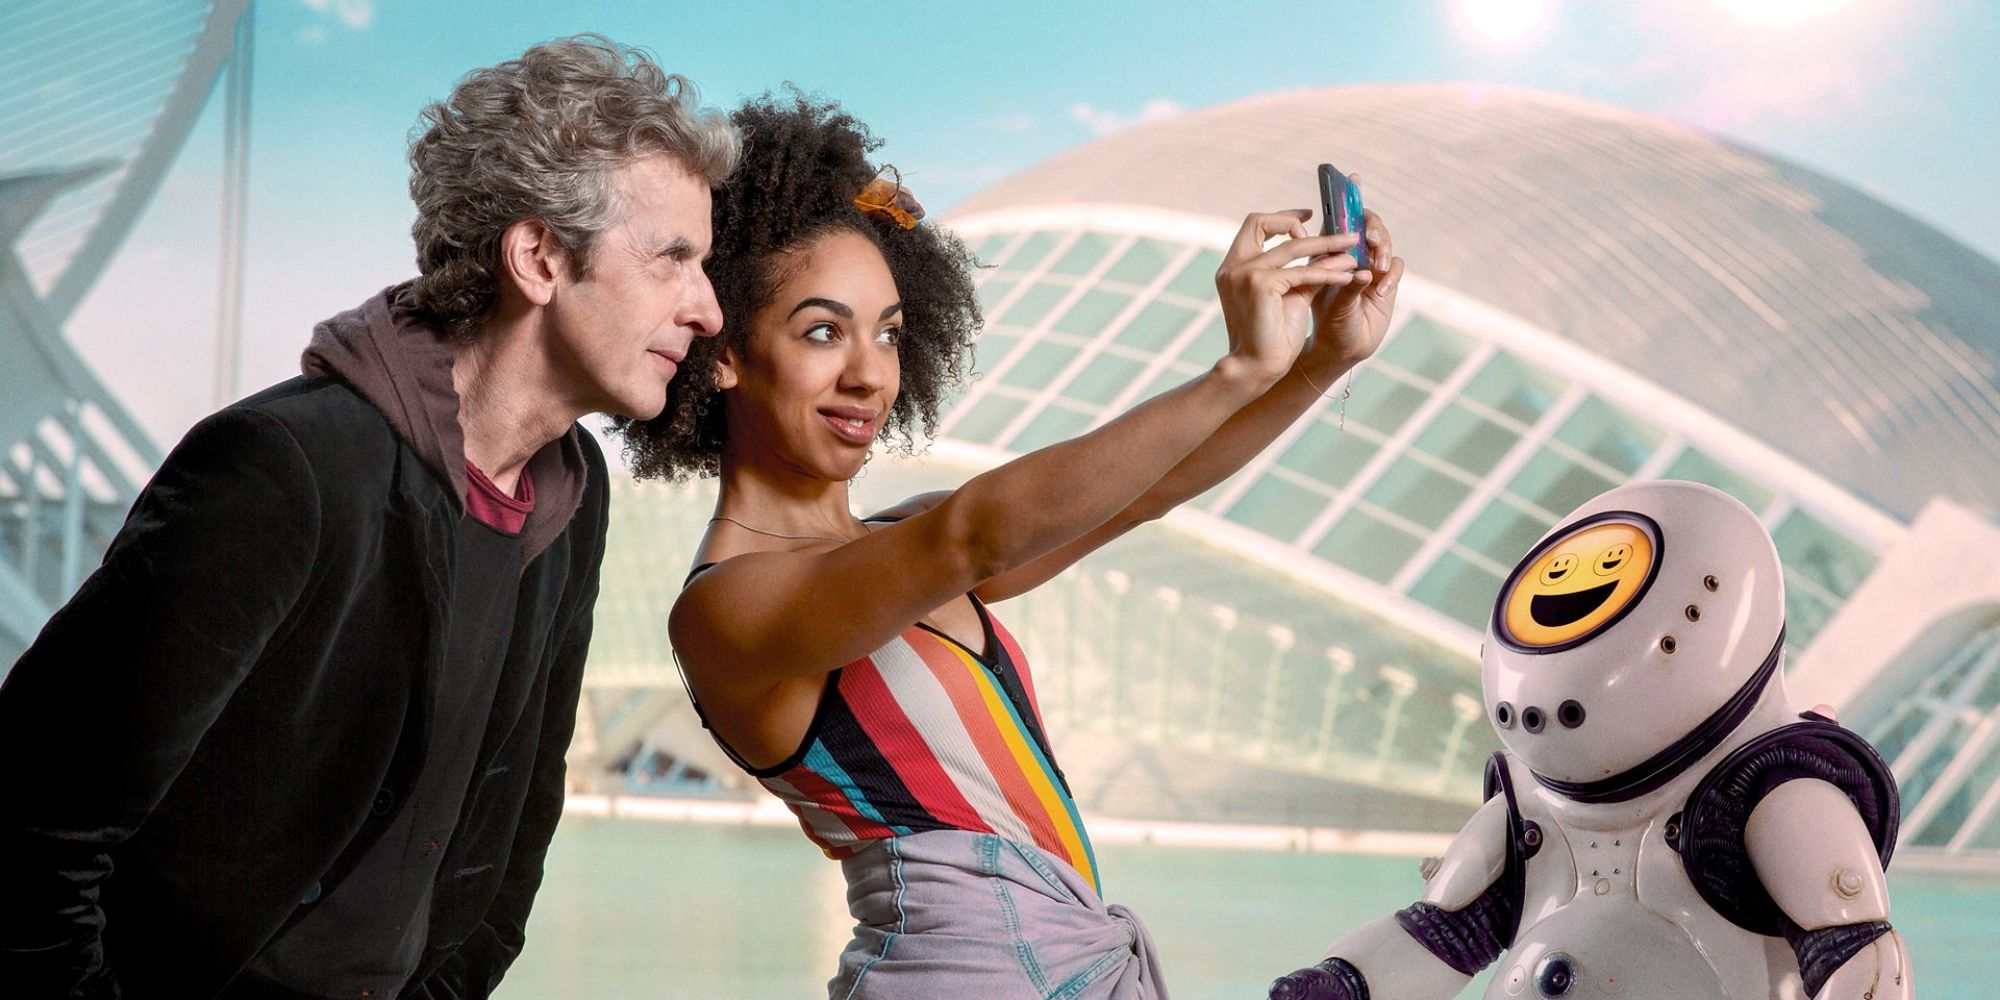 The Doctor and Bill Potts taking a selfie with an EmojiBot